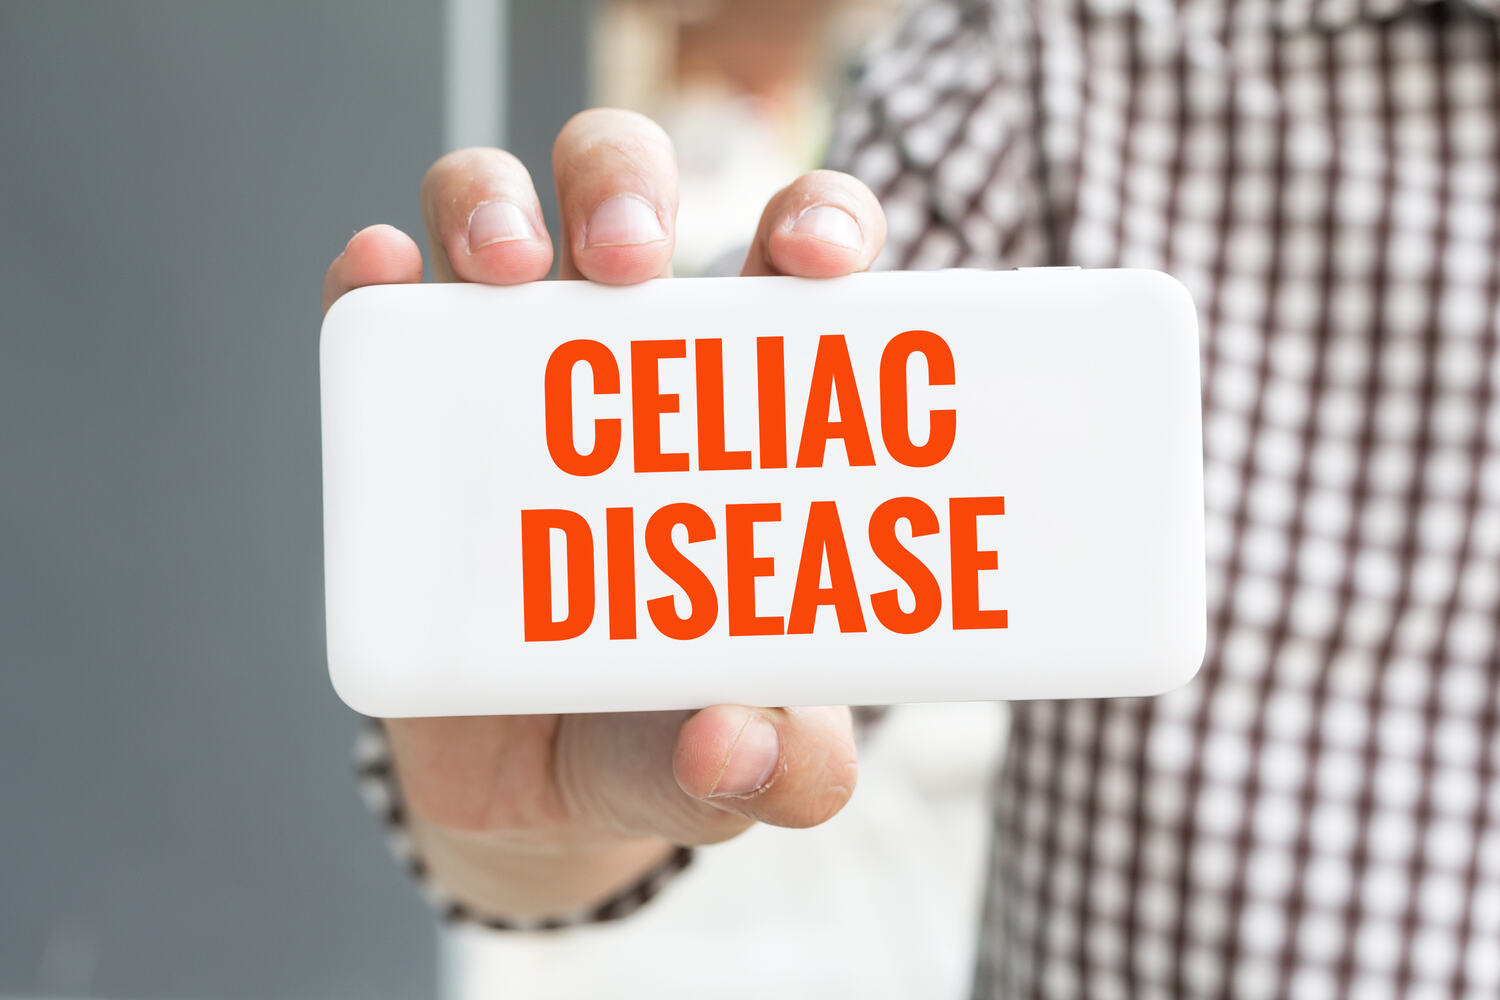 Celiac disease is another side effect of consuming whole grains